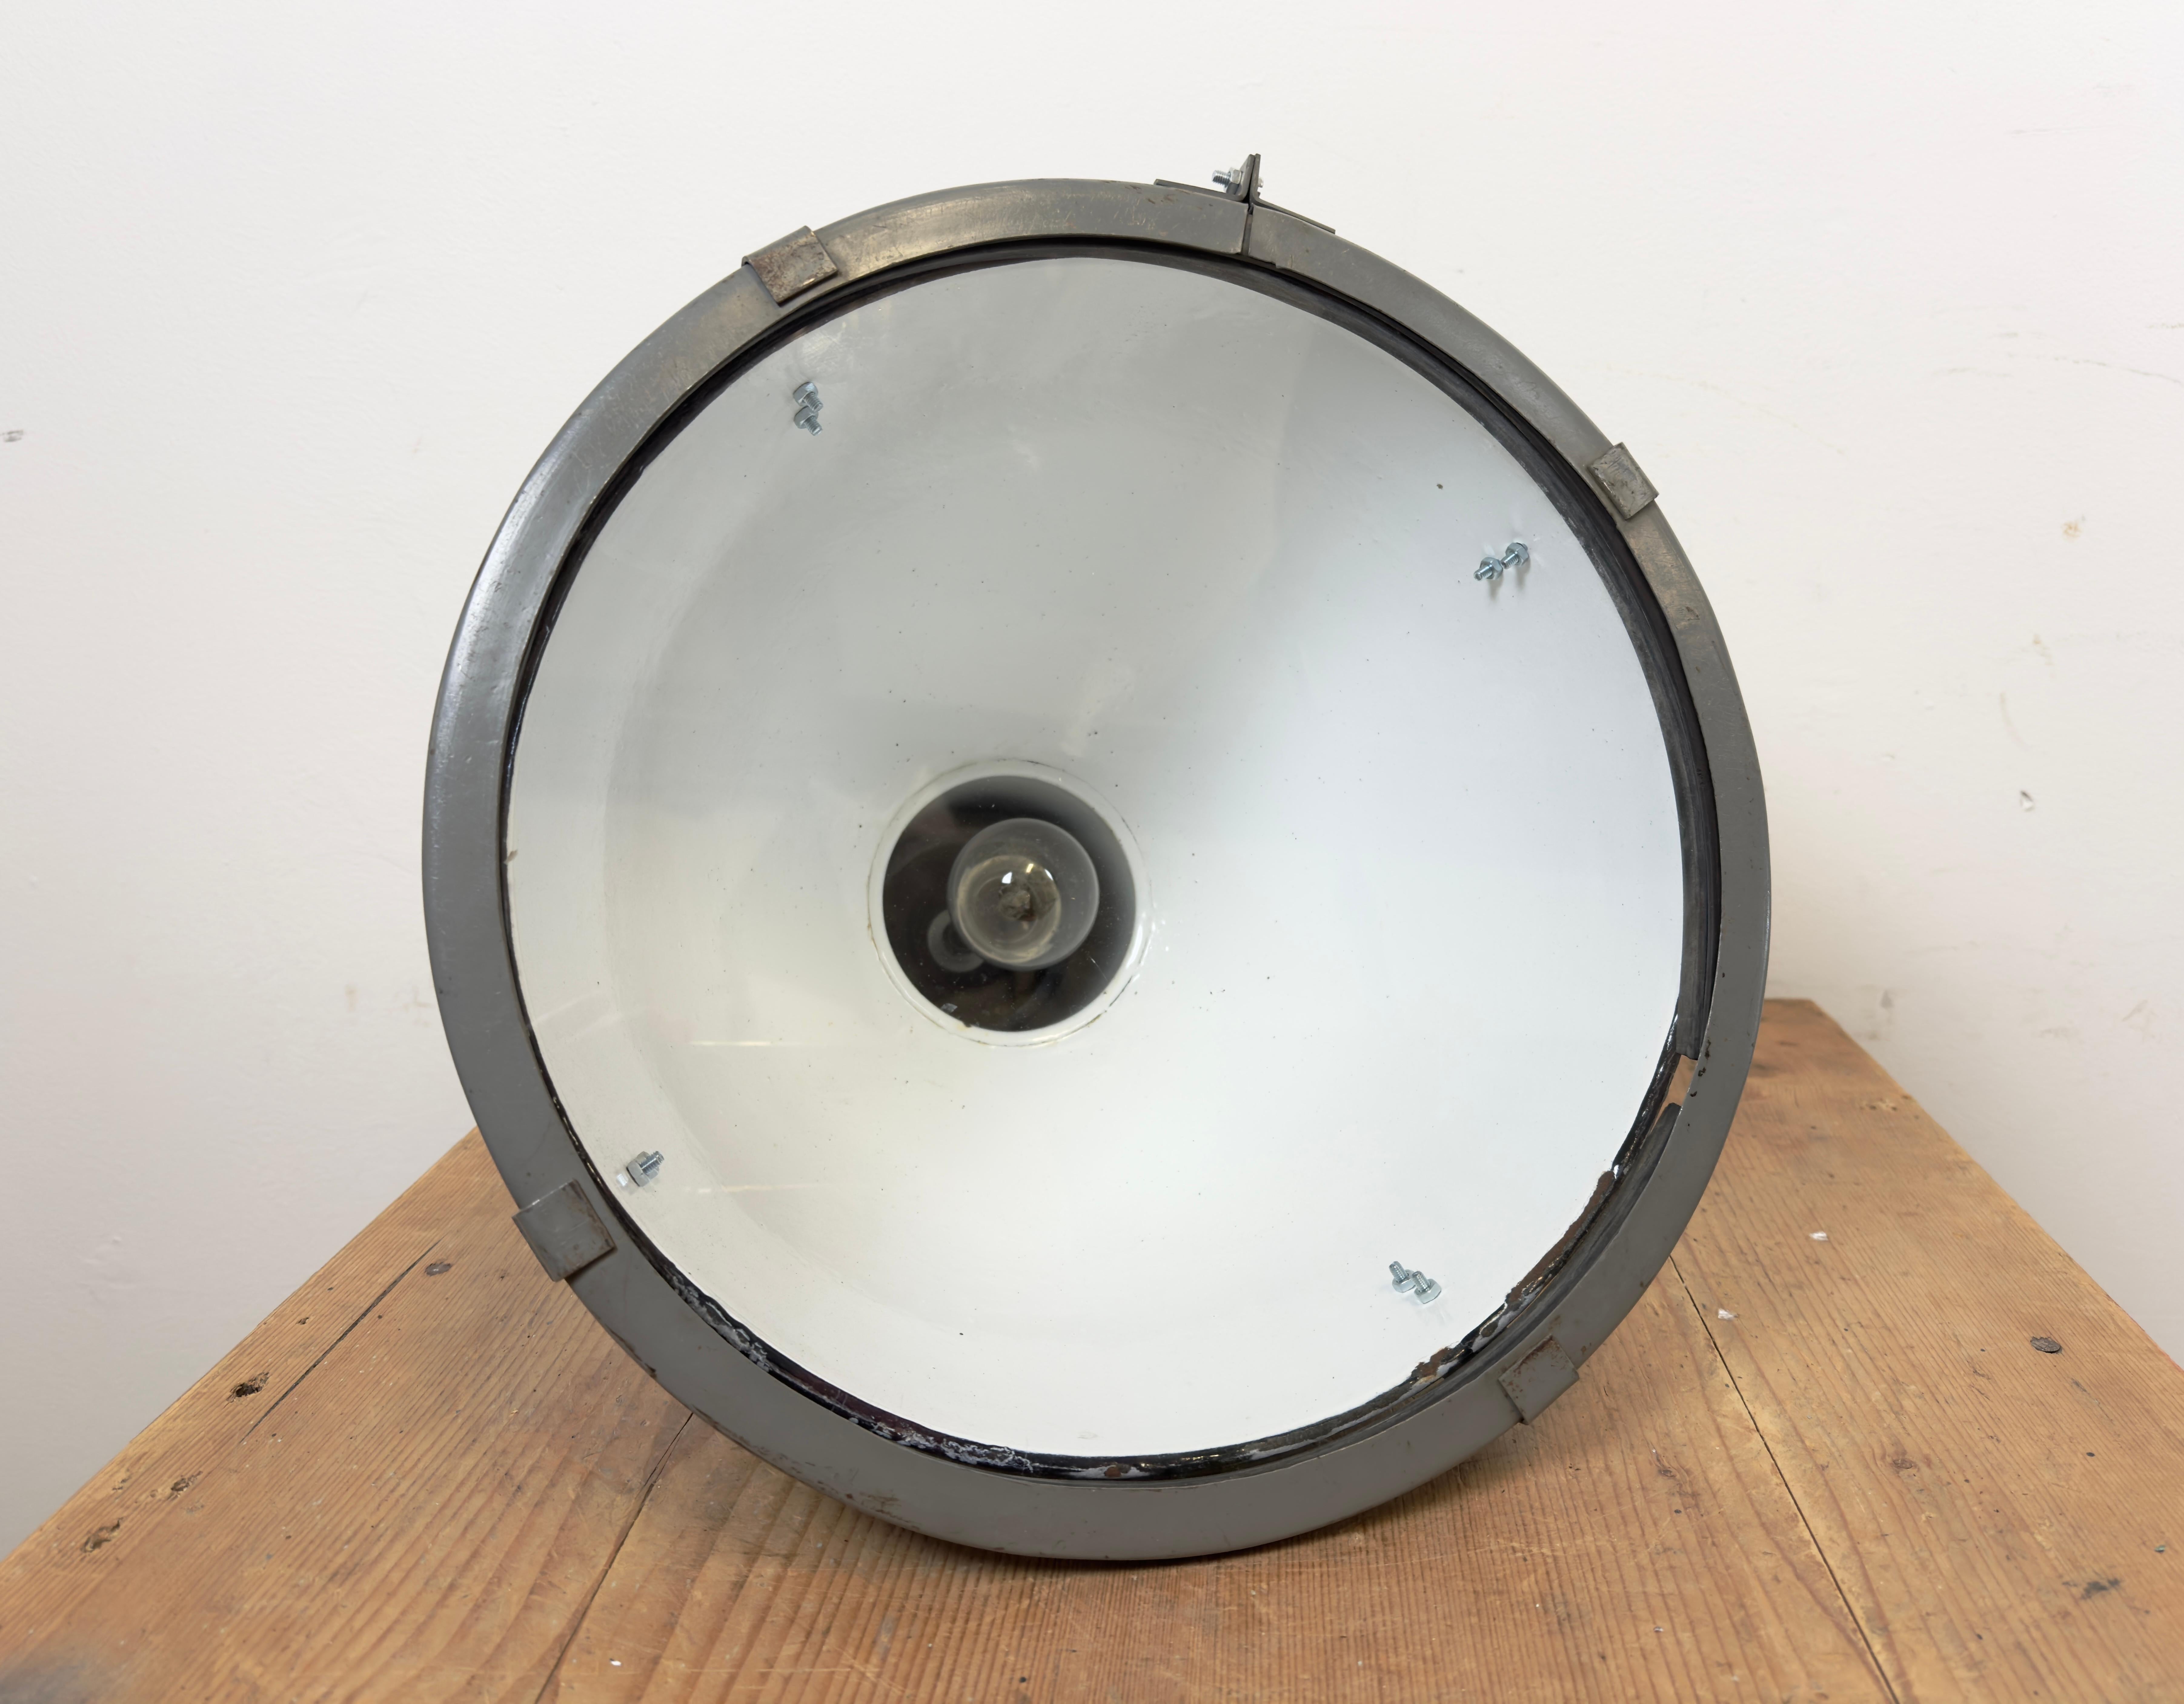 Bauhaus Grey Enamel Industrial Pendant Lamp with Glass Cover, 1950s For Sale 9